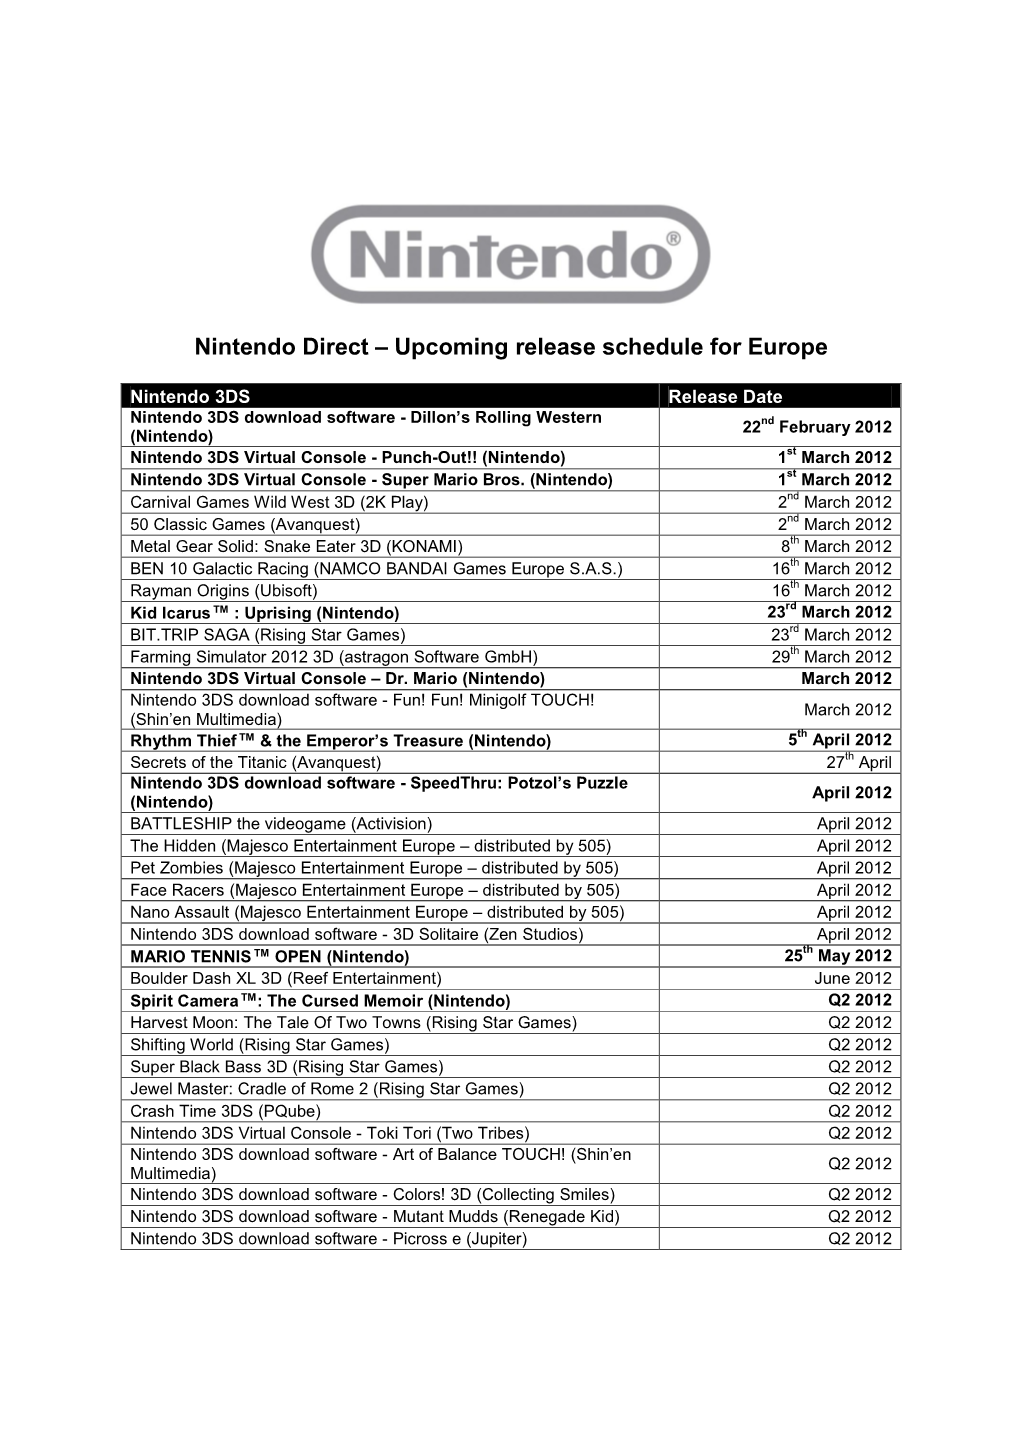 Nintendo Direct – Upcoming Release Schedule for Europe